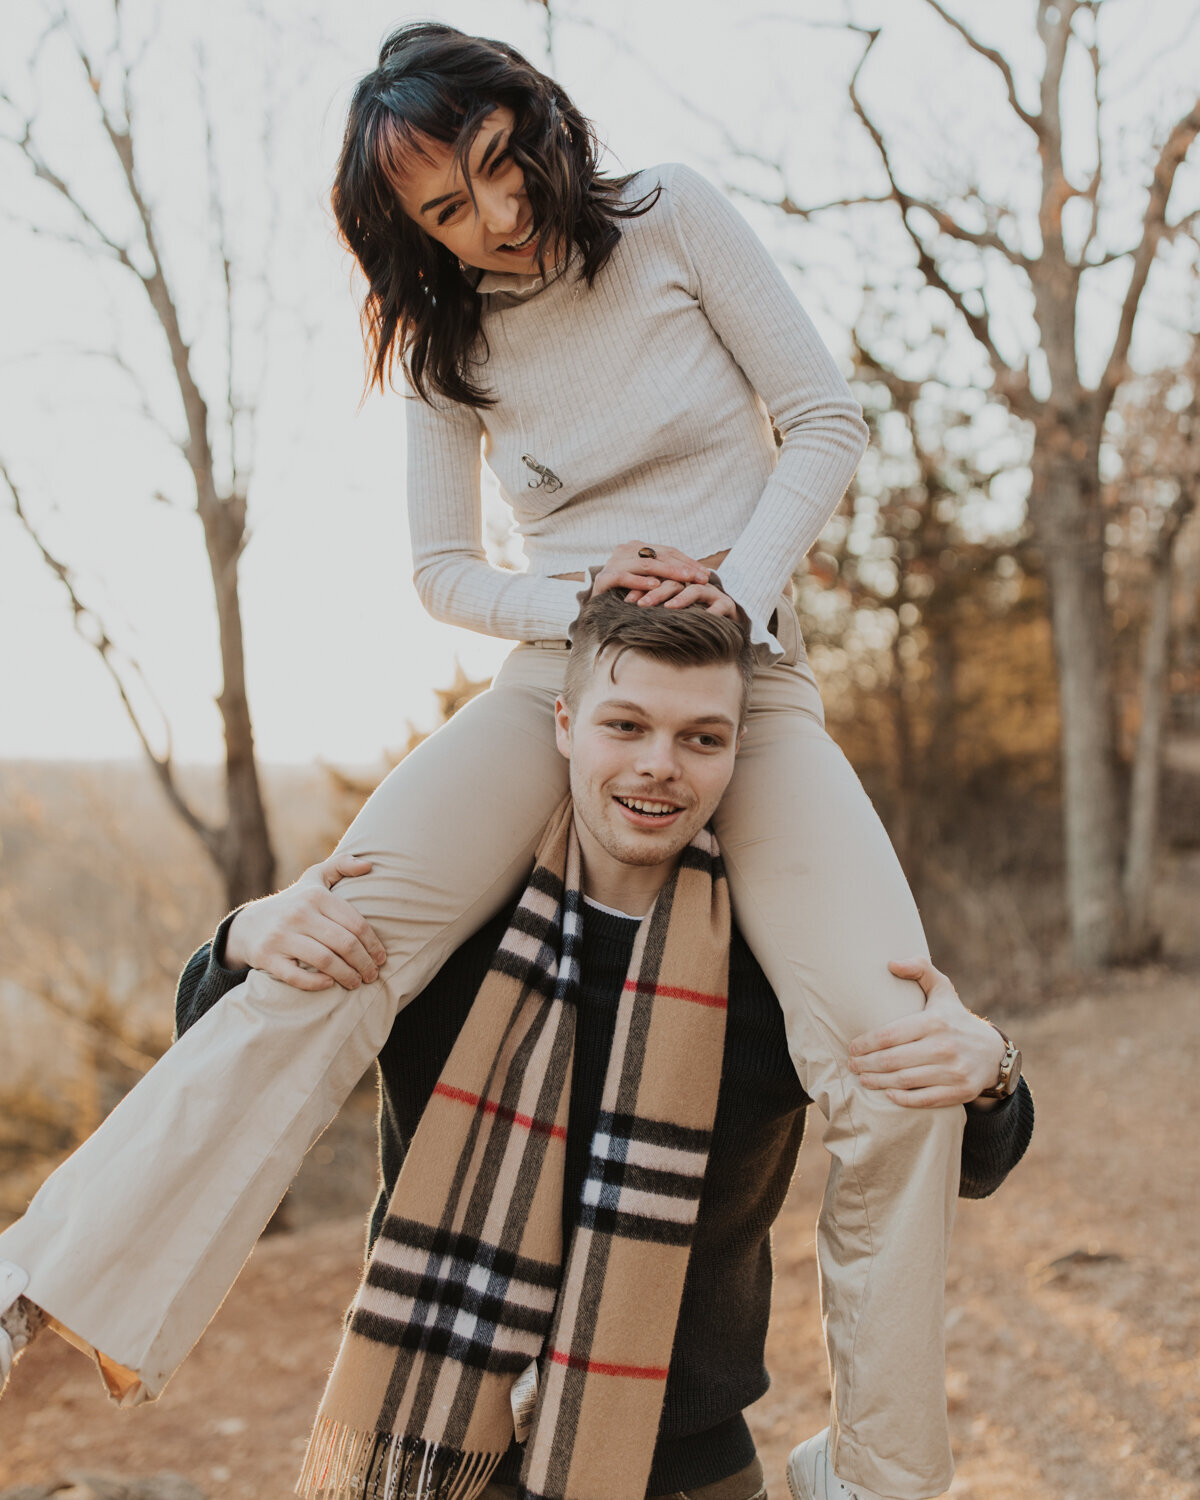 girl laughing while being held on boys shoulders during a fall photoshoot